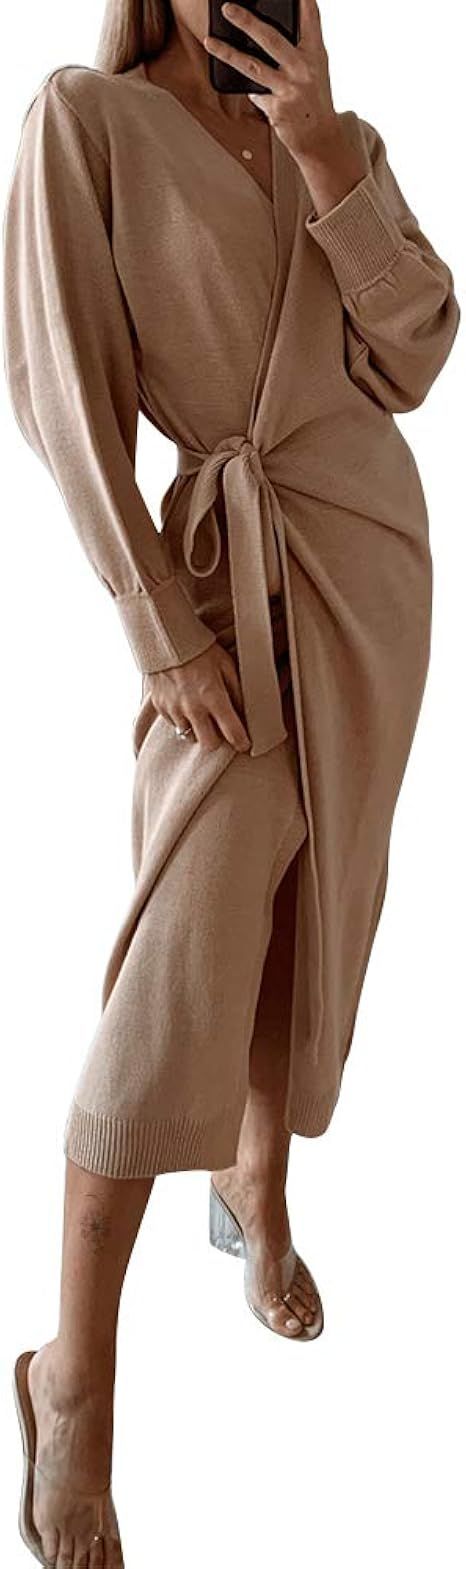 Exlura Womens Knit Sweater Dress Casual Solid Long Sleeve Wrap Maxi Dresses with Belt | Amazon (US)